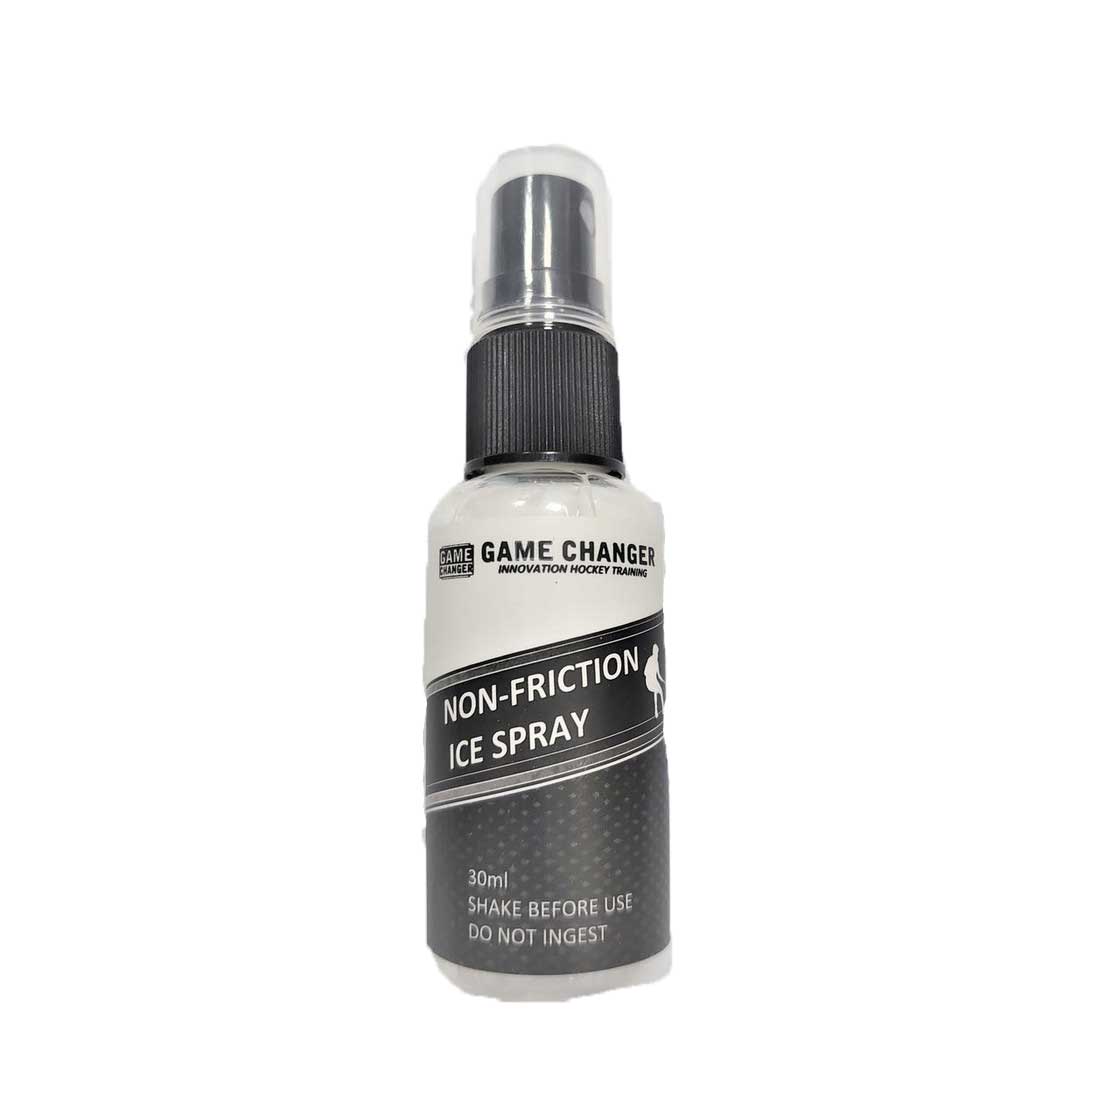 Game Changer Non-Friction Spray 20.91044